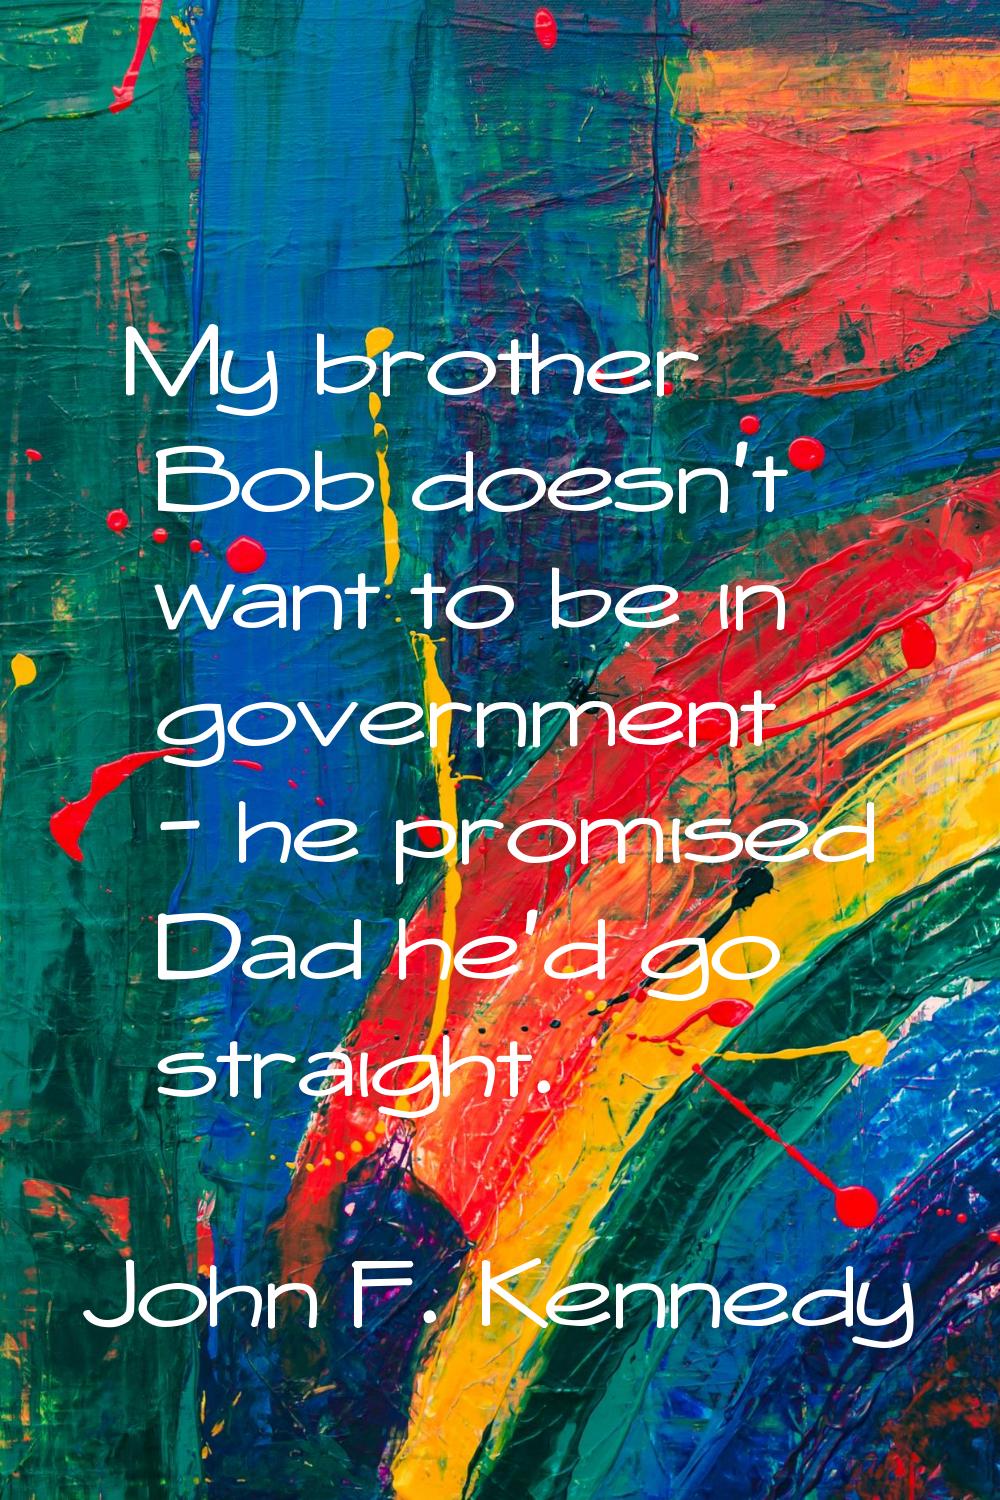 My brother Bob doesn't want to be in government - he promised Dad he'd go straight.